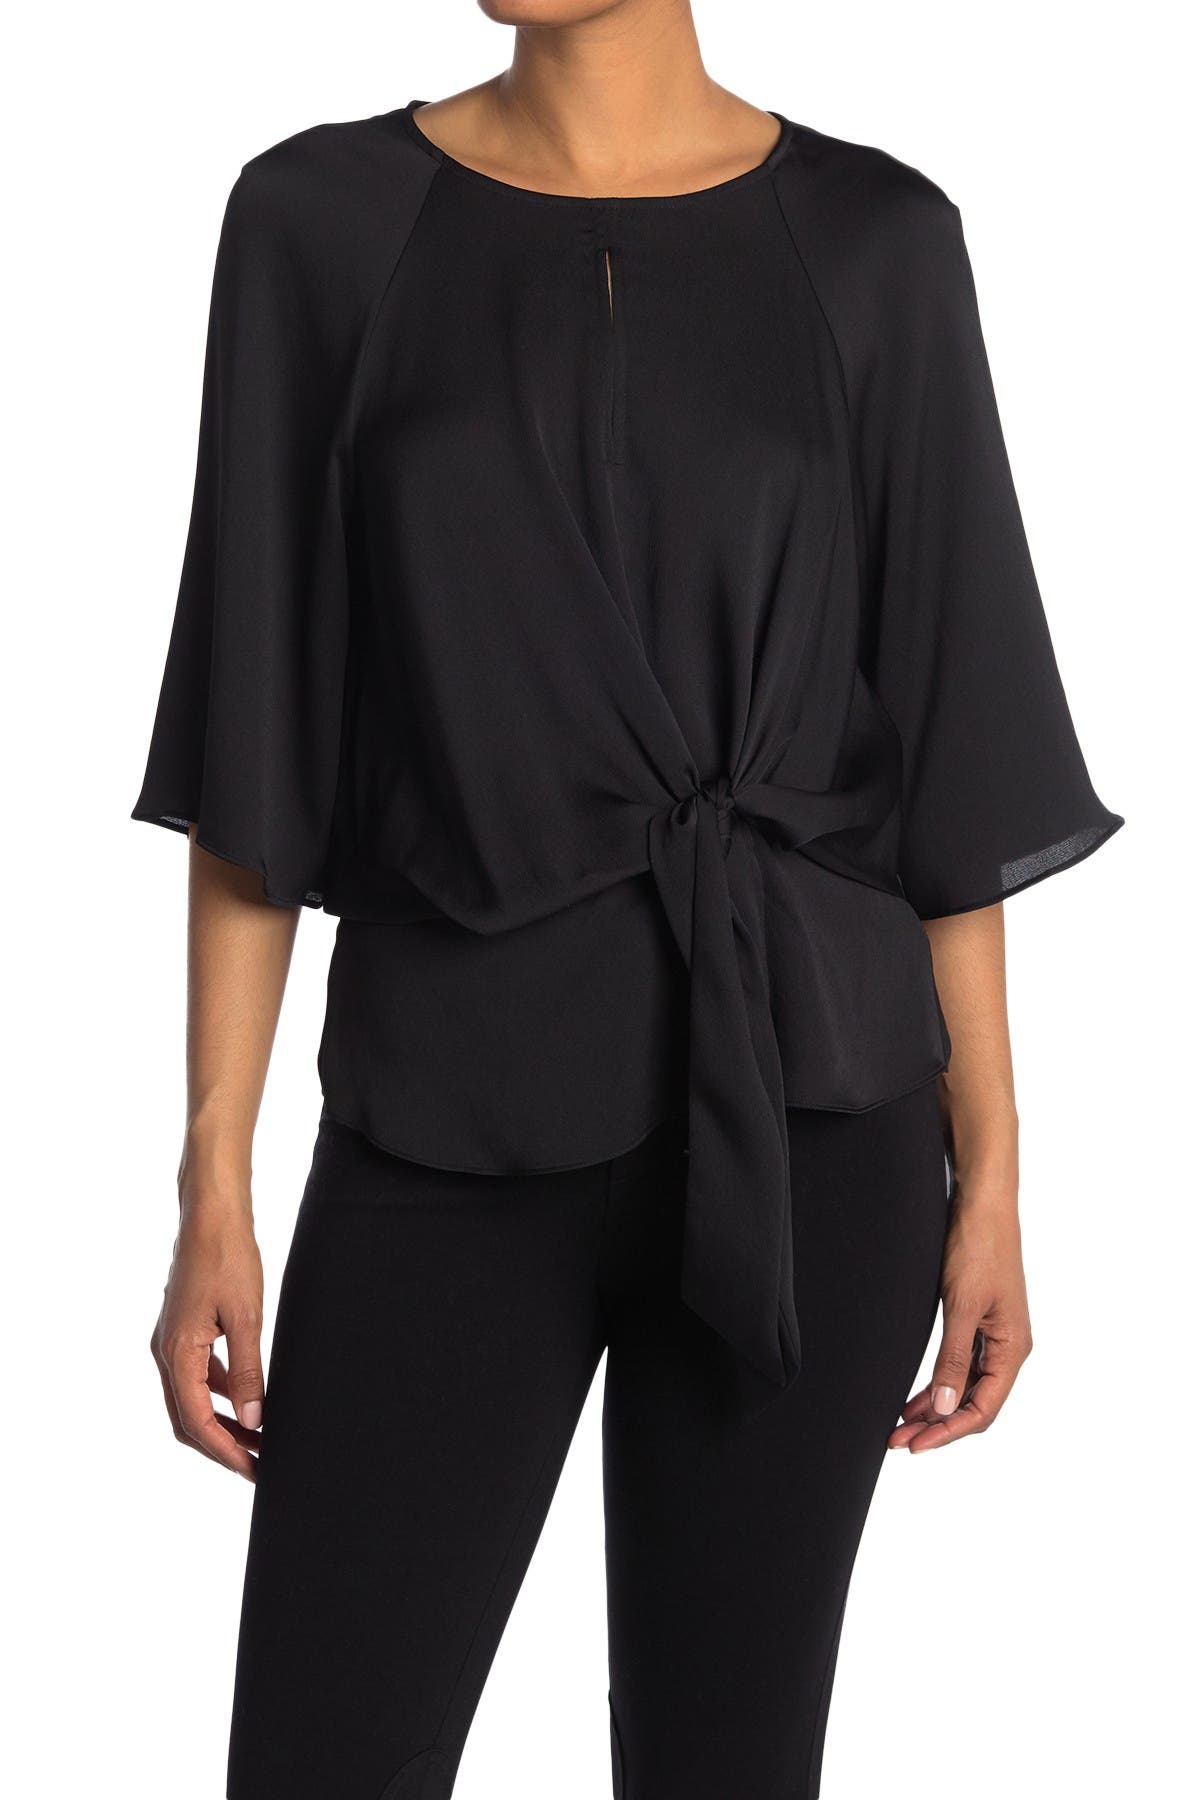 vince camuto blouses nordstrom